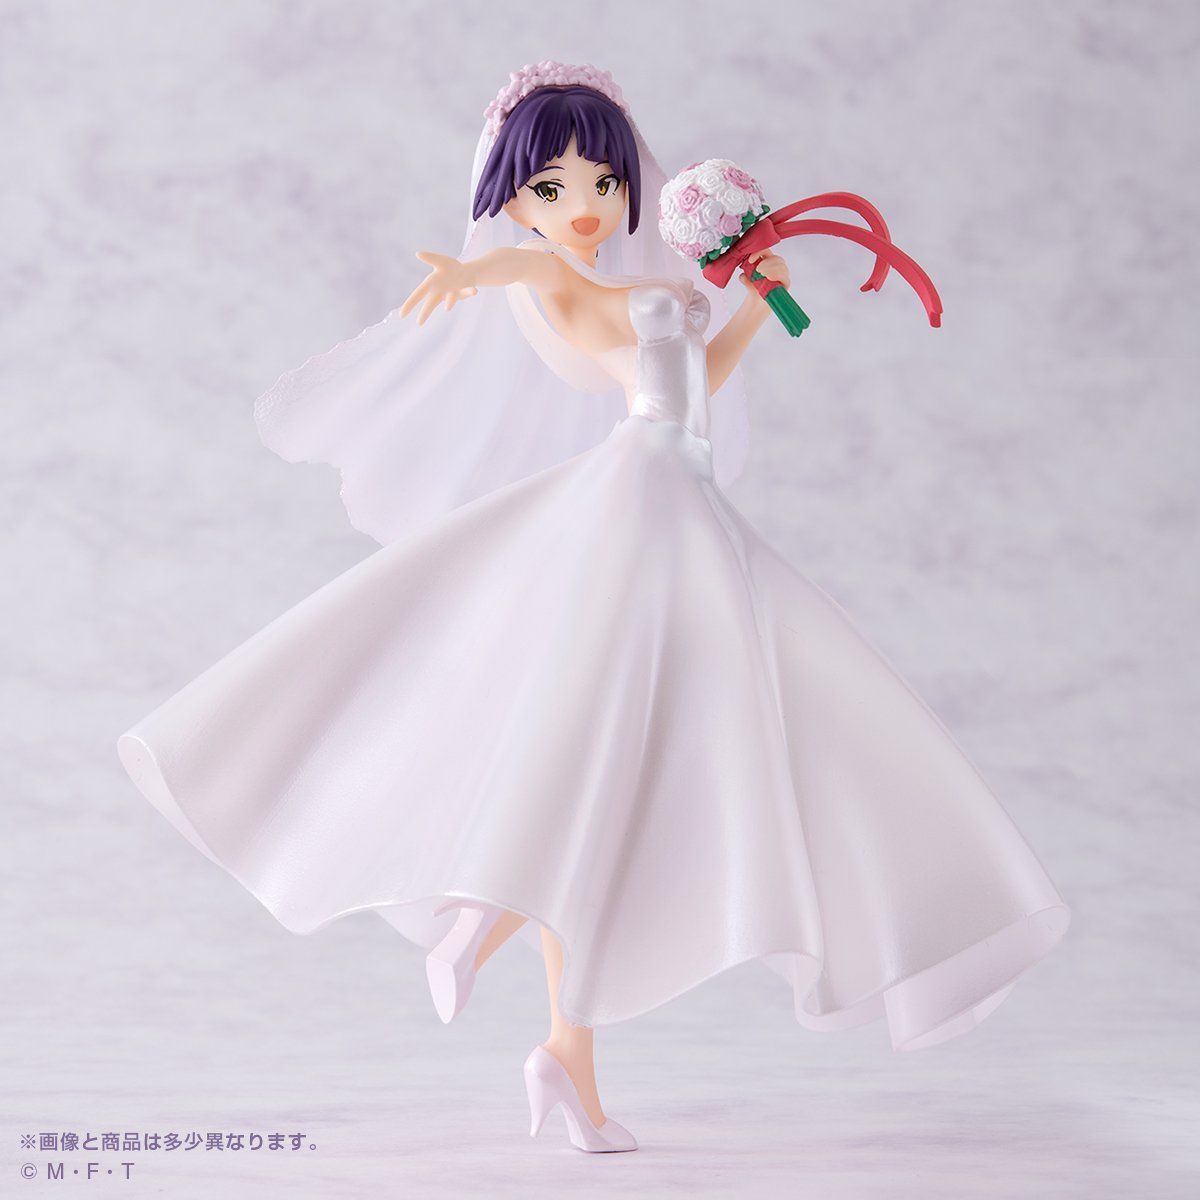 New [GeGeGe no Kitaro] erotic figure to undress even clothes in the erotic wedding dress of the cat daughter! 4